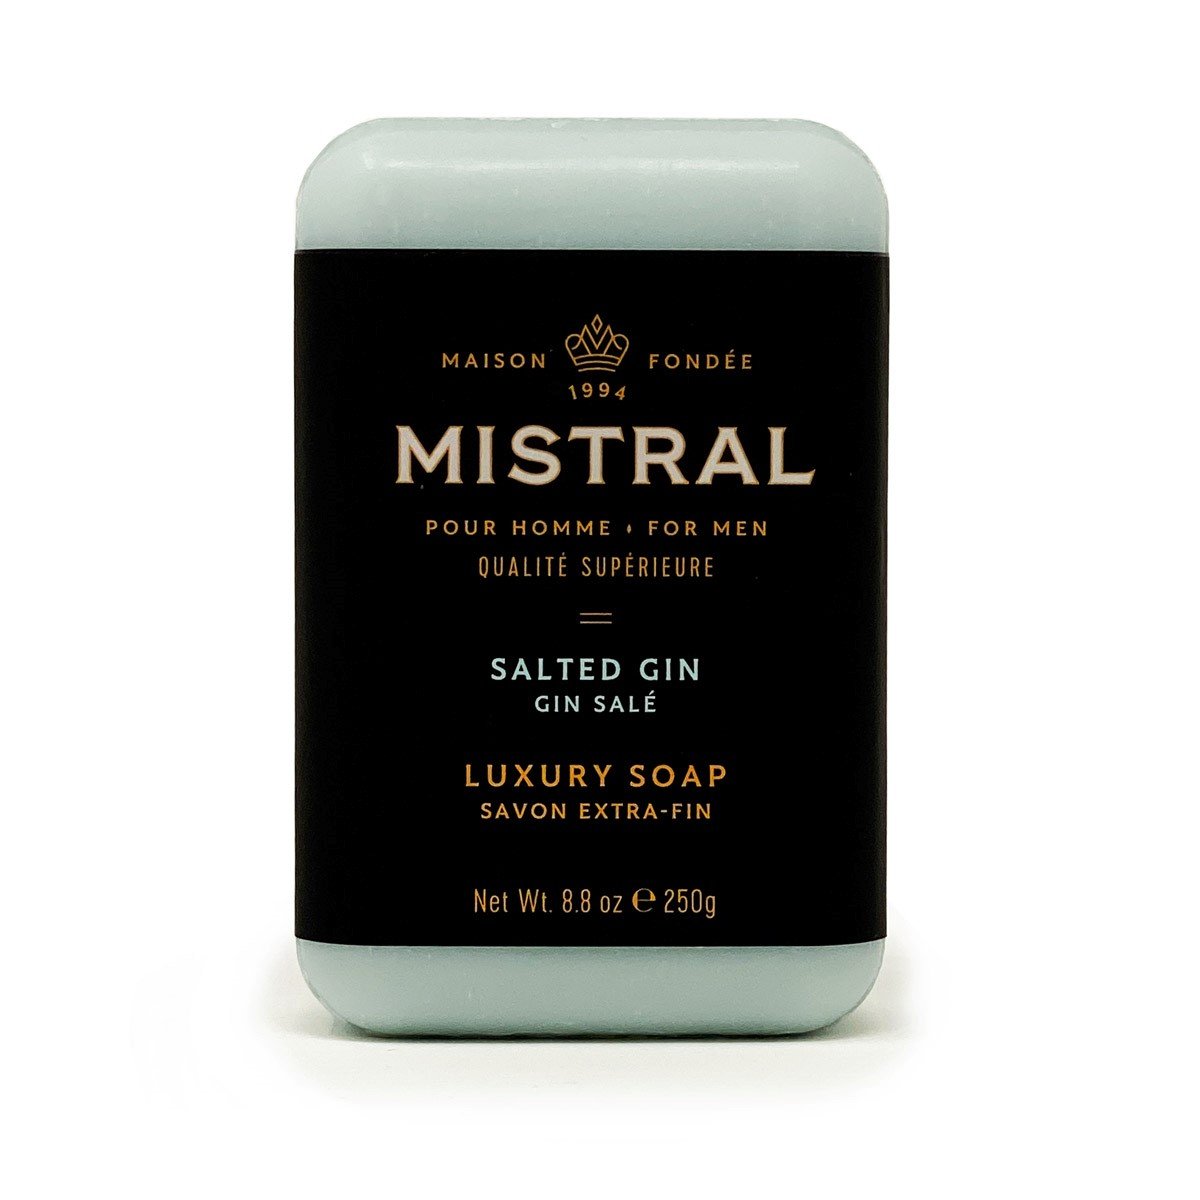 Slated Gin Soap Bar at 6Whiskey six whiskey by Mistral for men